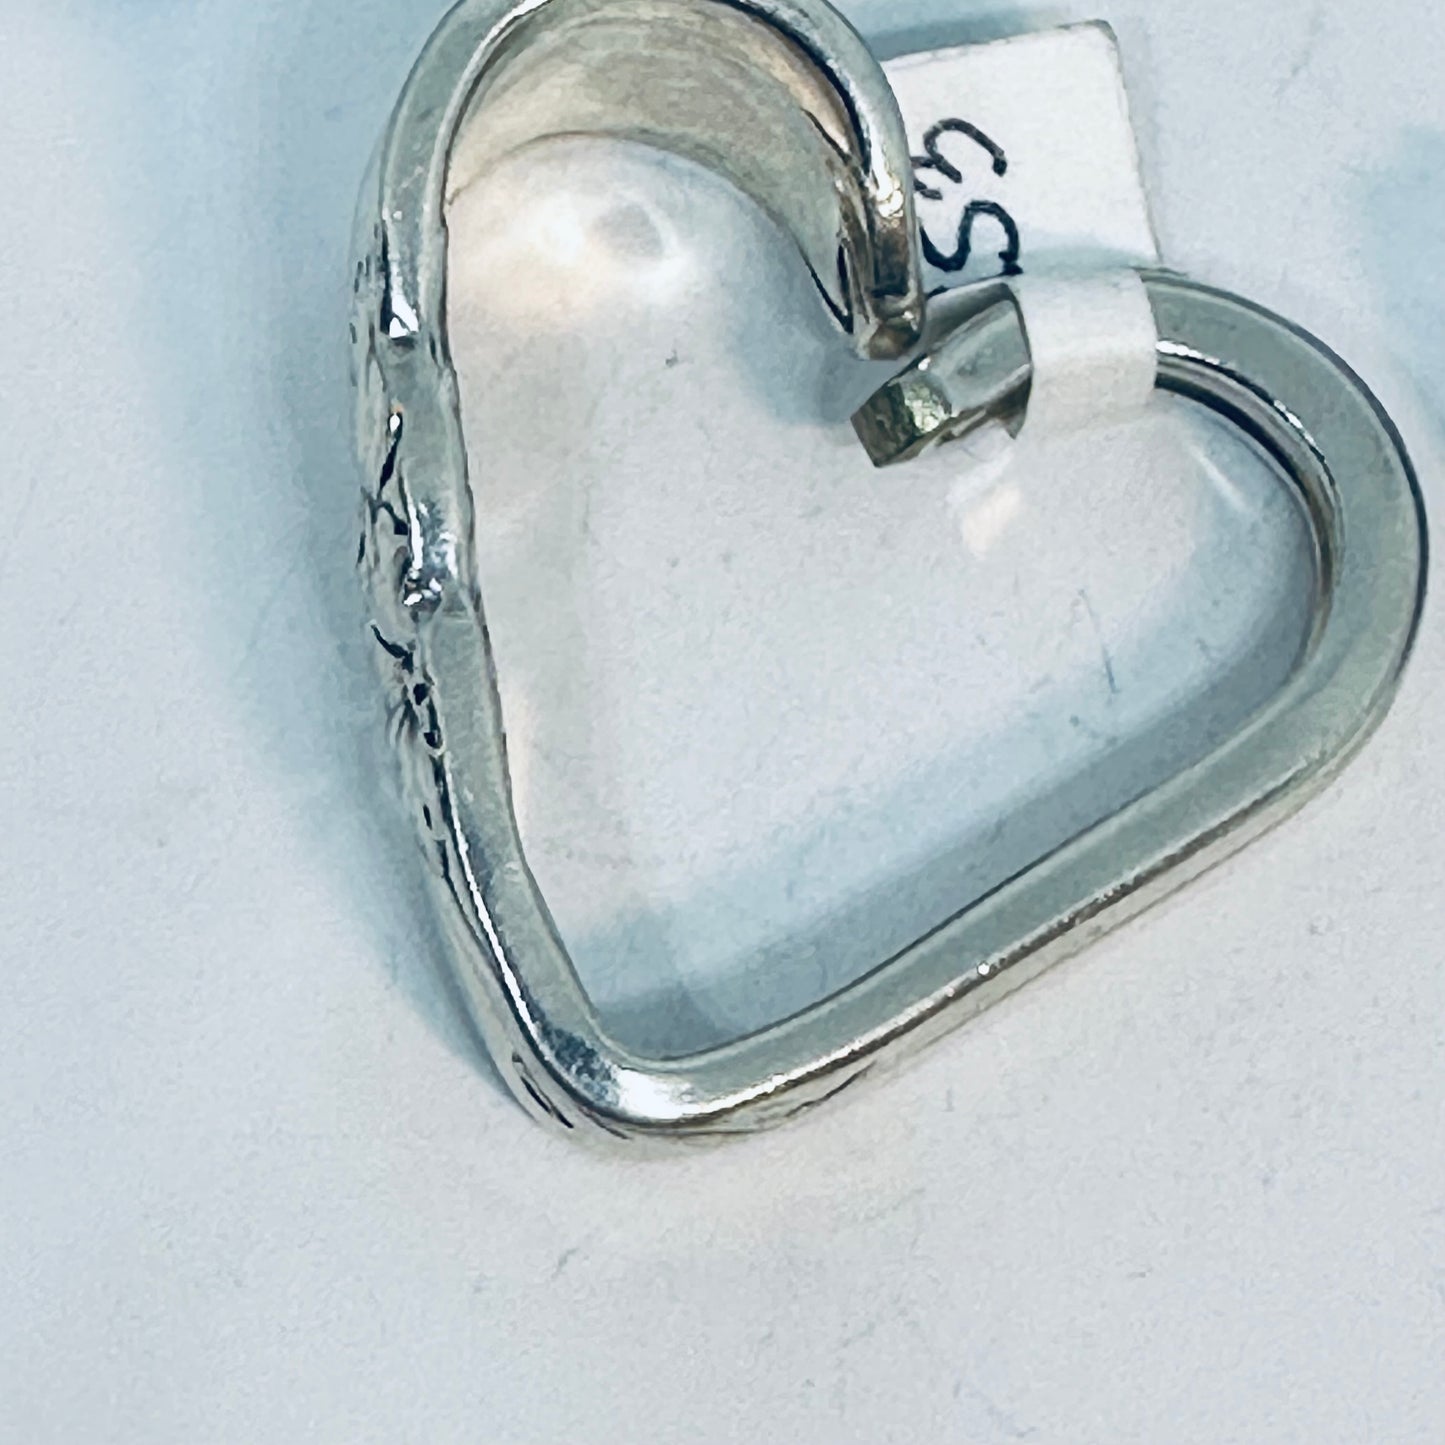 Hearts made from Vintage Silverware | Bent Spoon Fork | Heart-Shaped Pendant Necklace Keychain Key Ring | Silverware Jewelry | Love | Valentine's Day Gift